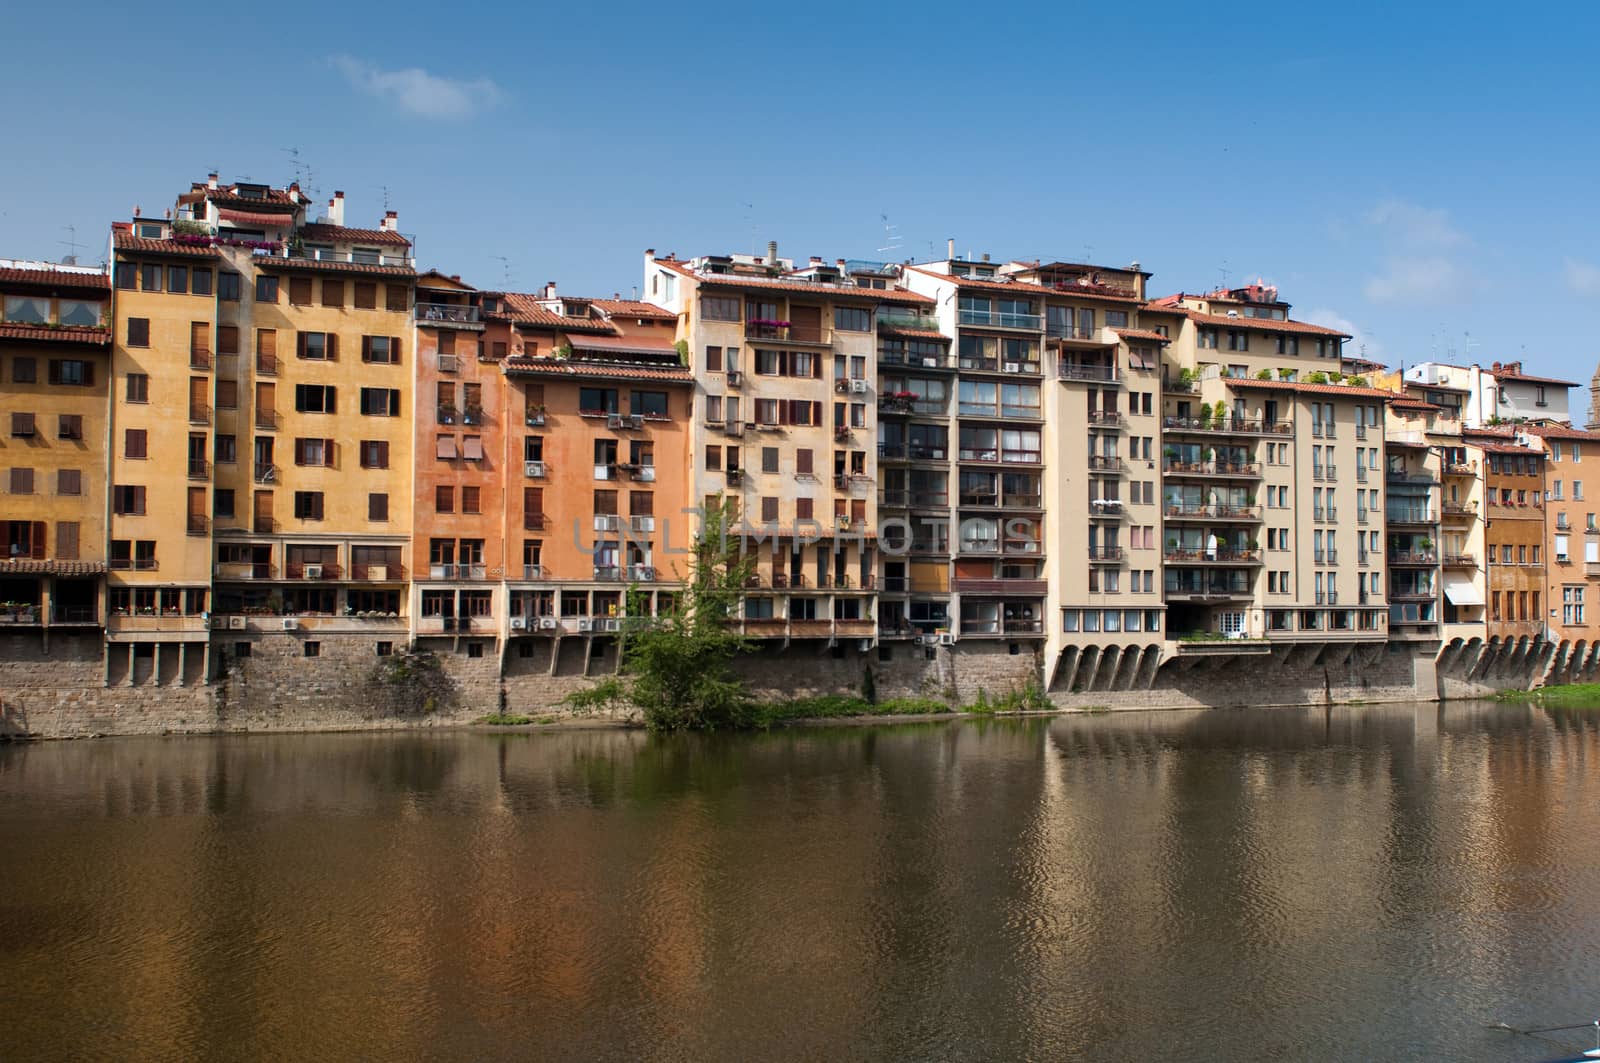 Bank of river Arno in Florence, Tuscany, Italy. by lexan